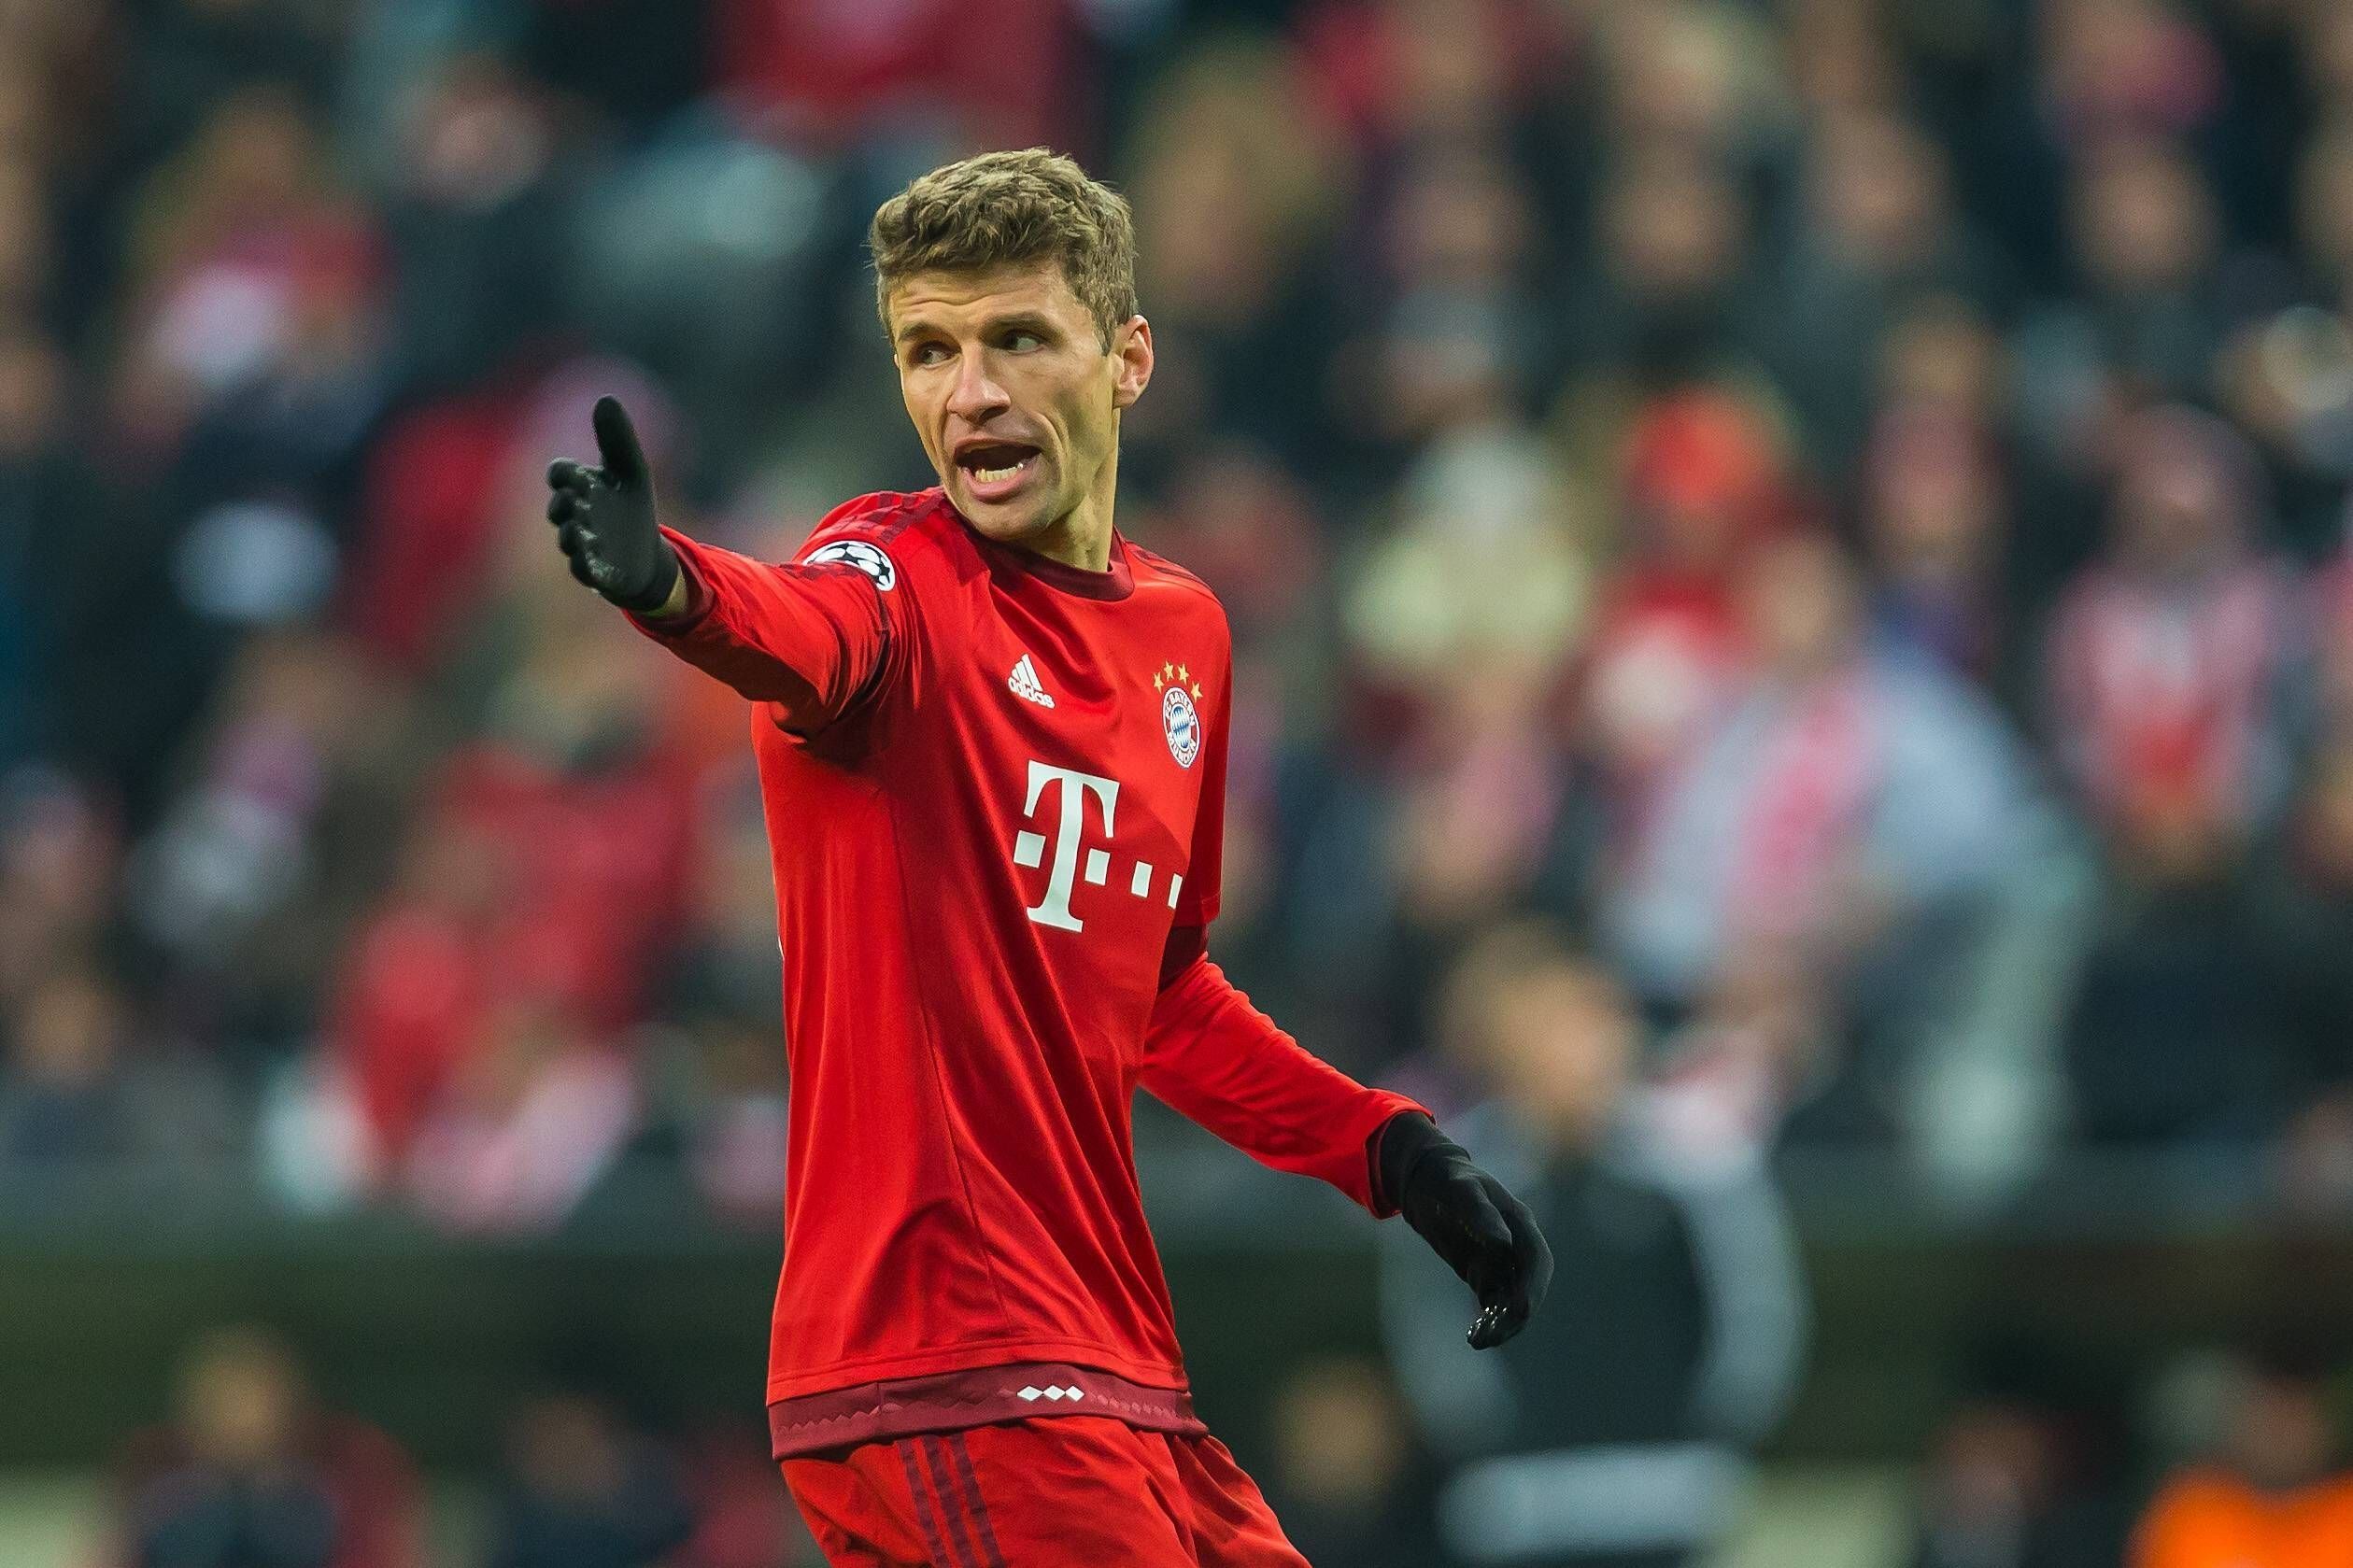 Thomas Muller Wallpaper High Resolution and Quality Download